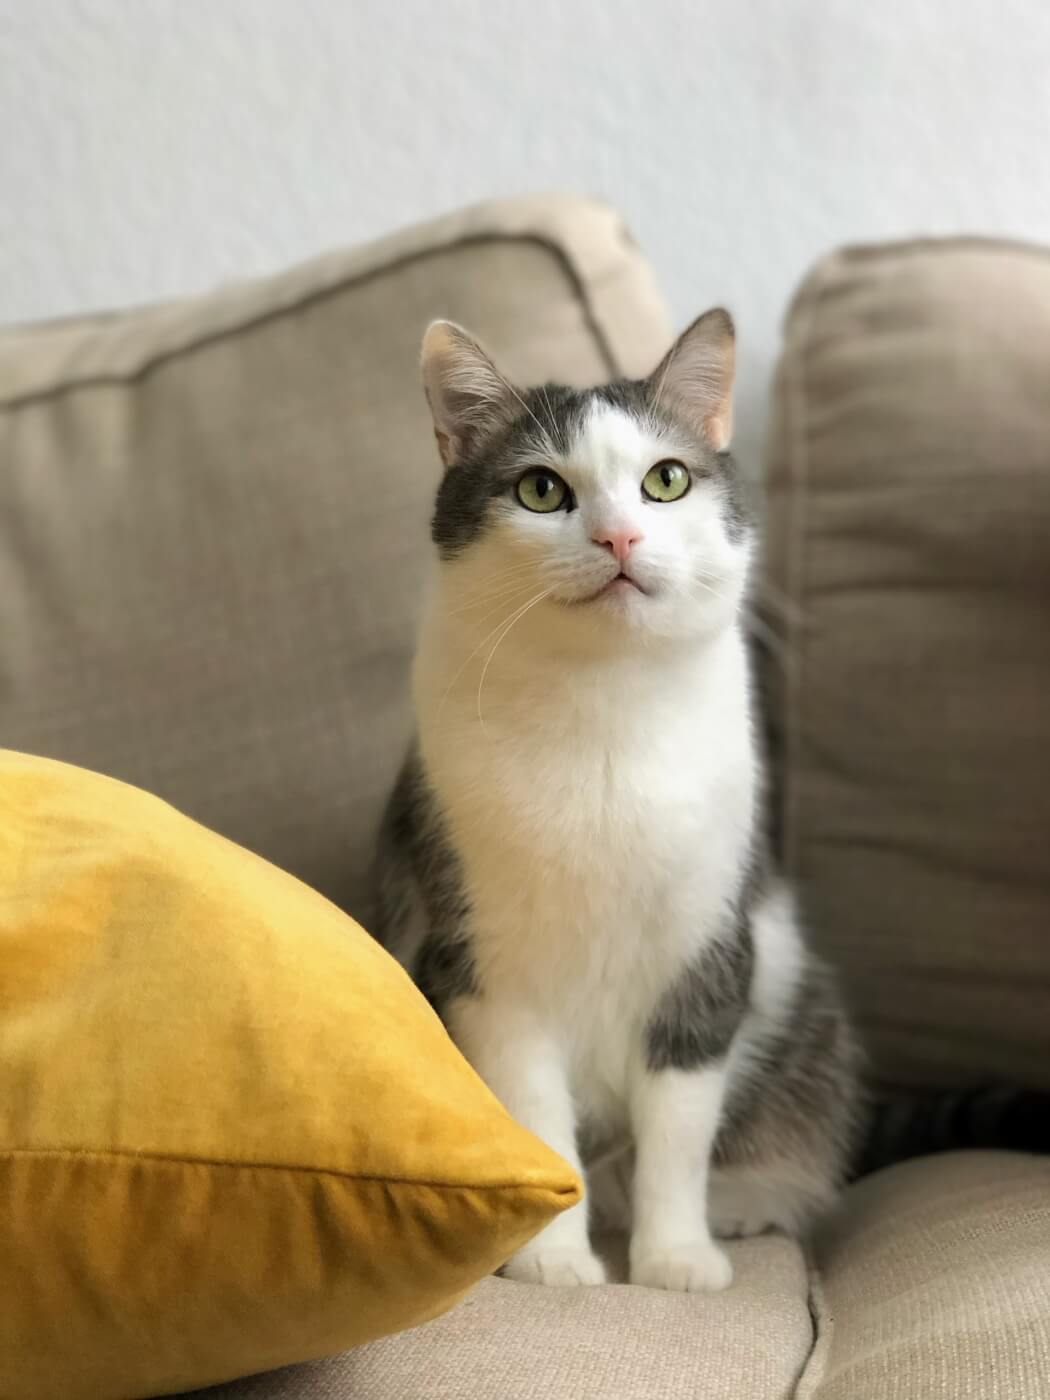 A gray and white cat sits on a couch next to a yellow pillow